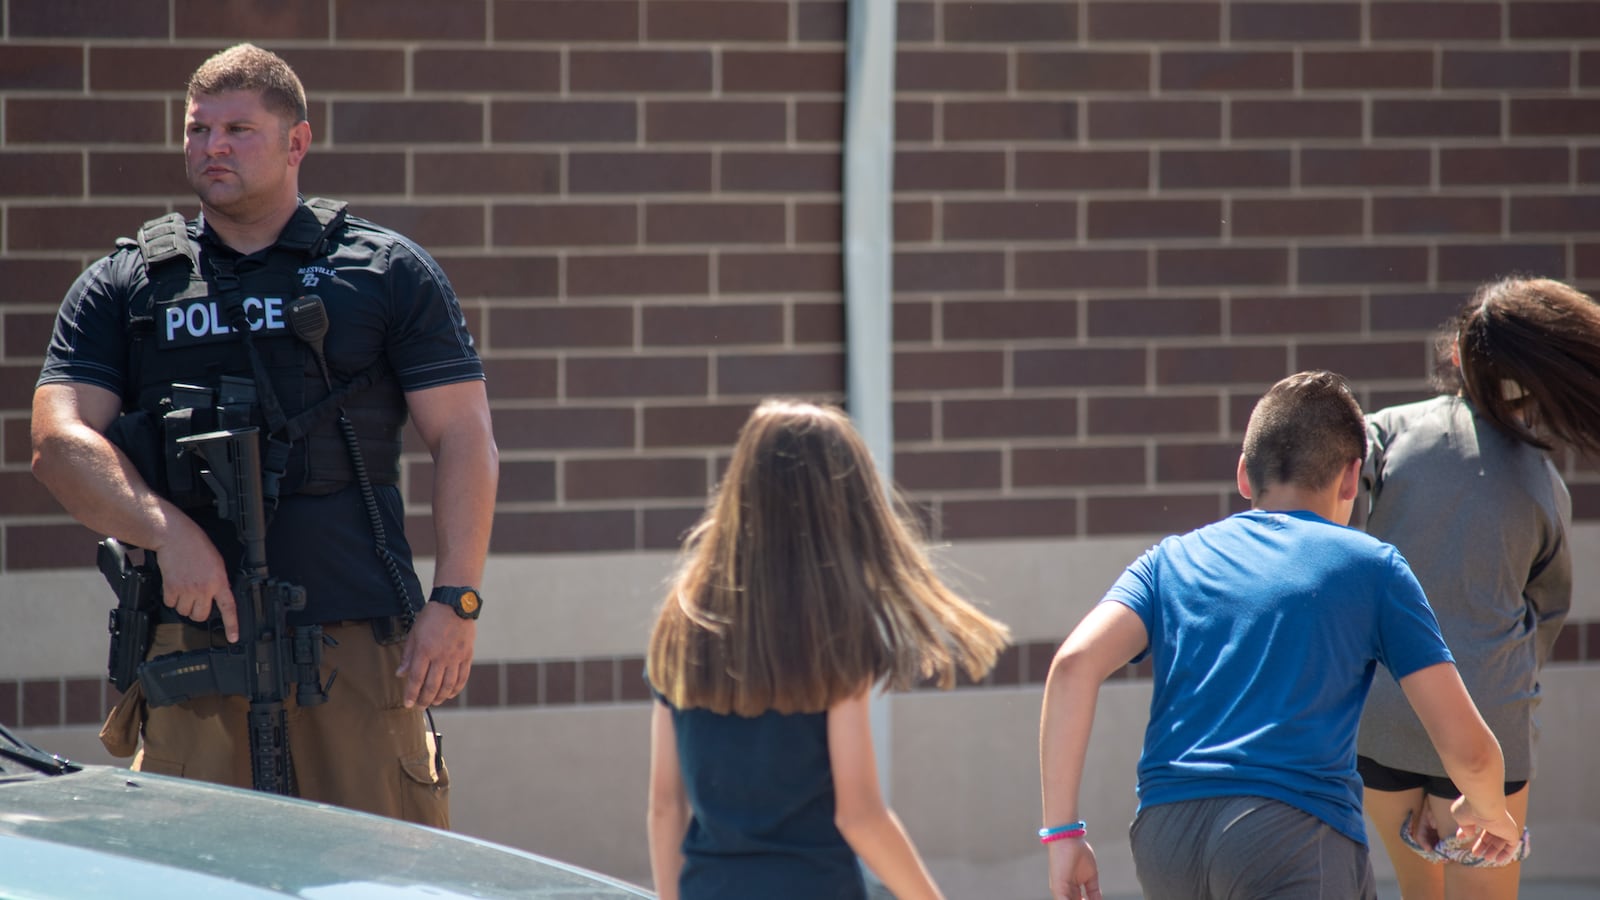 Police asses the scene outside Noblesville High School after a shooting at Noblesville West Middle School on May 25, 2018 (Photo by Kevin Moloney/Getty Images)